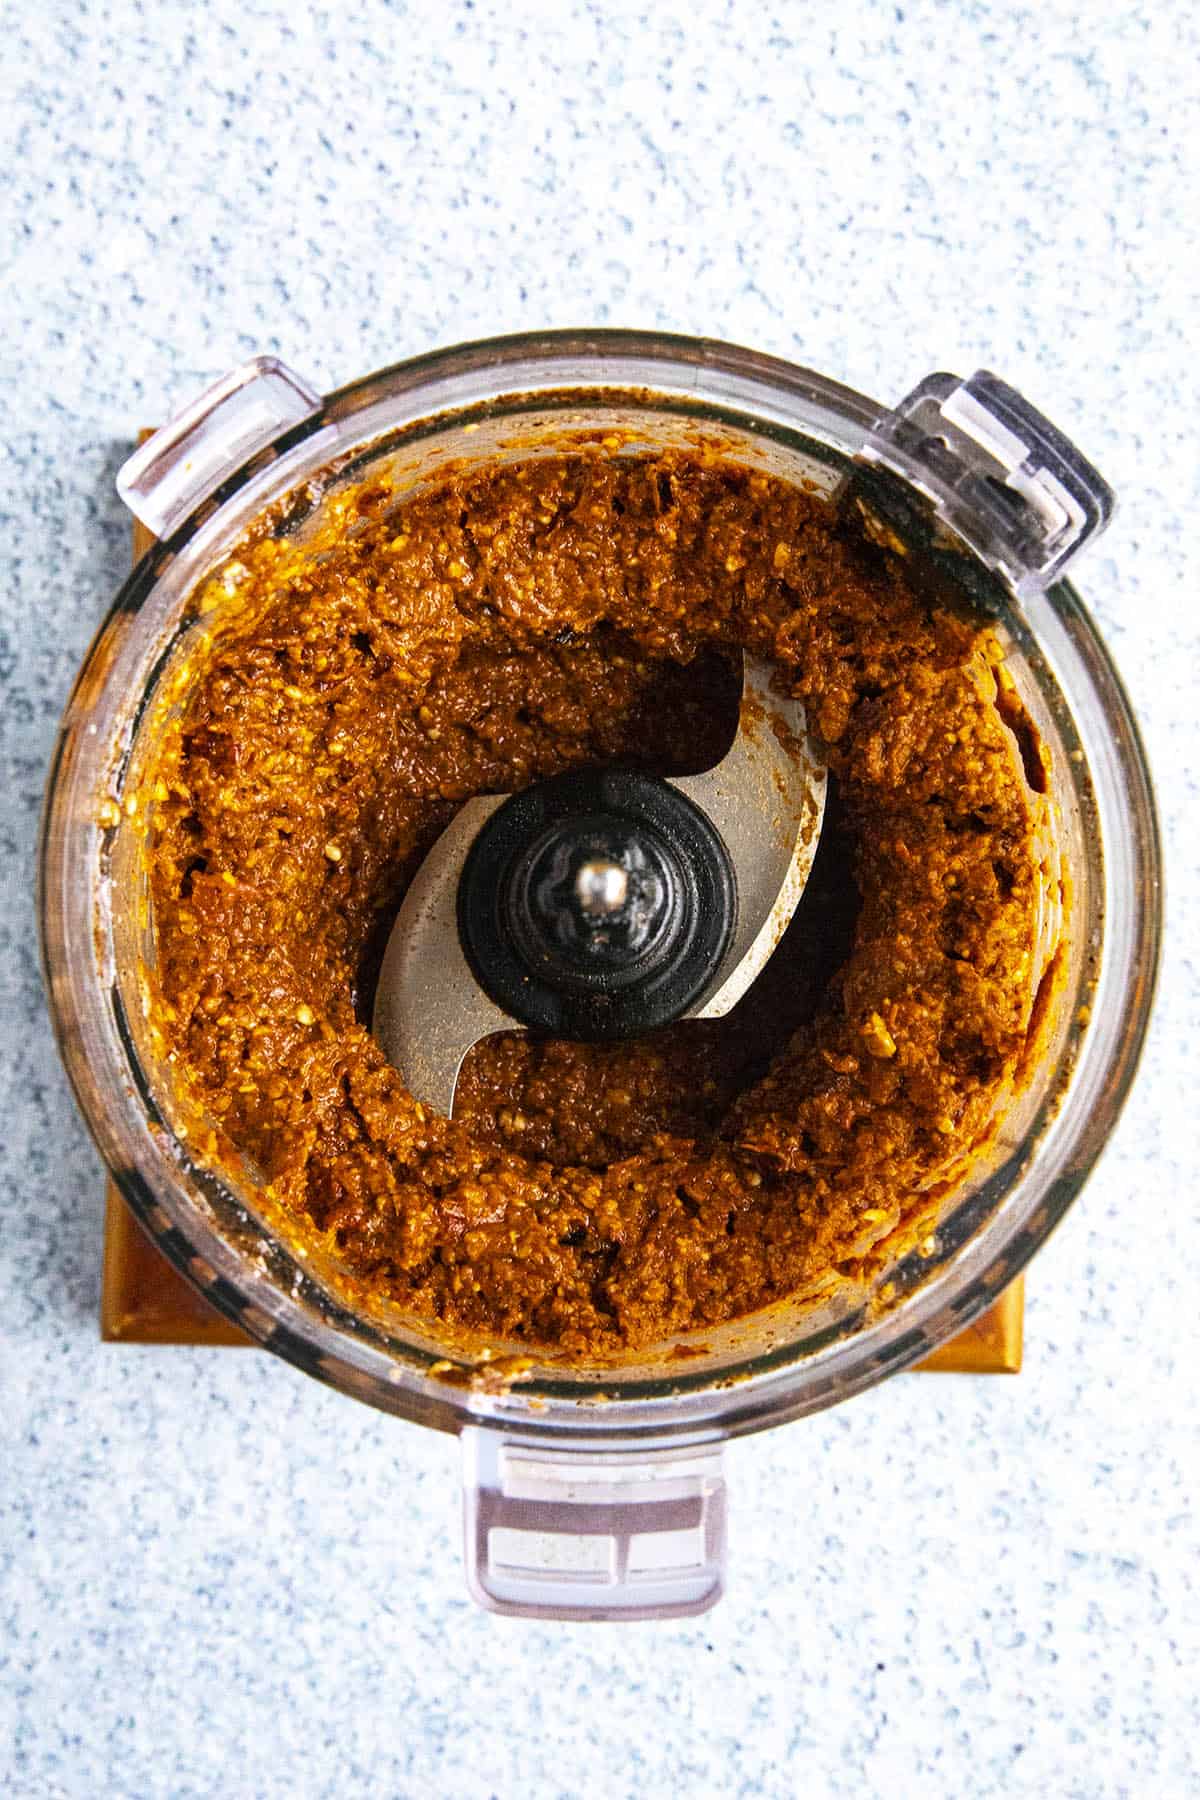 Processing the pipian paste in a food processor